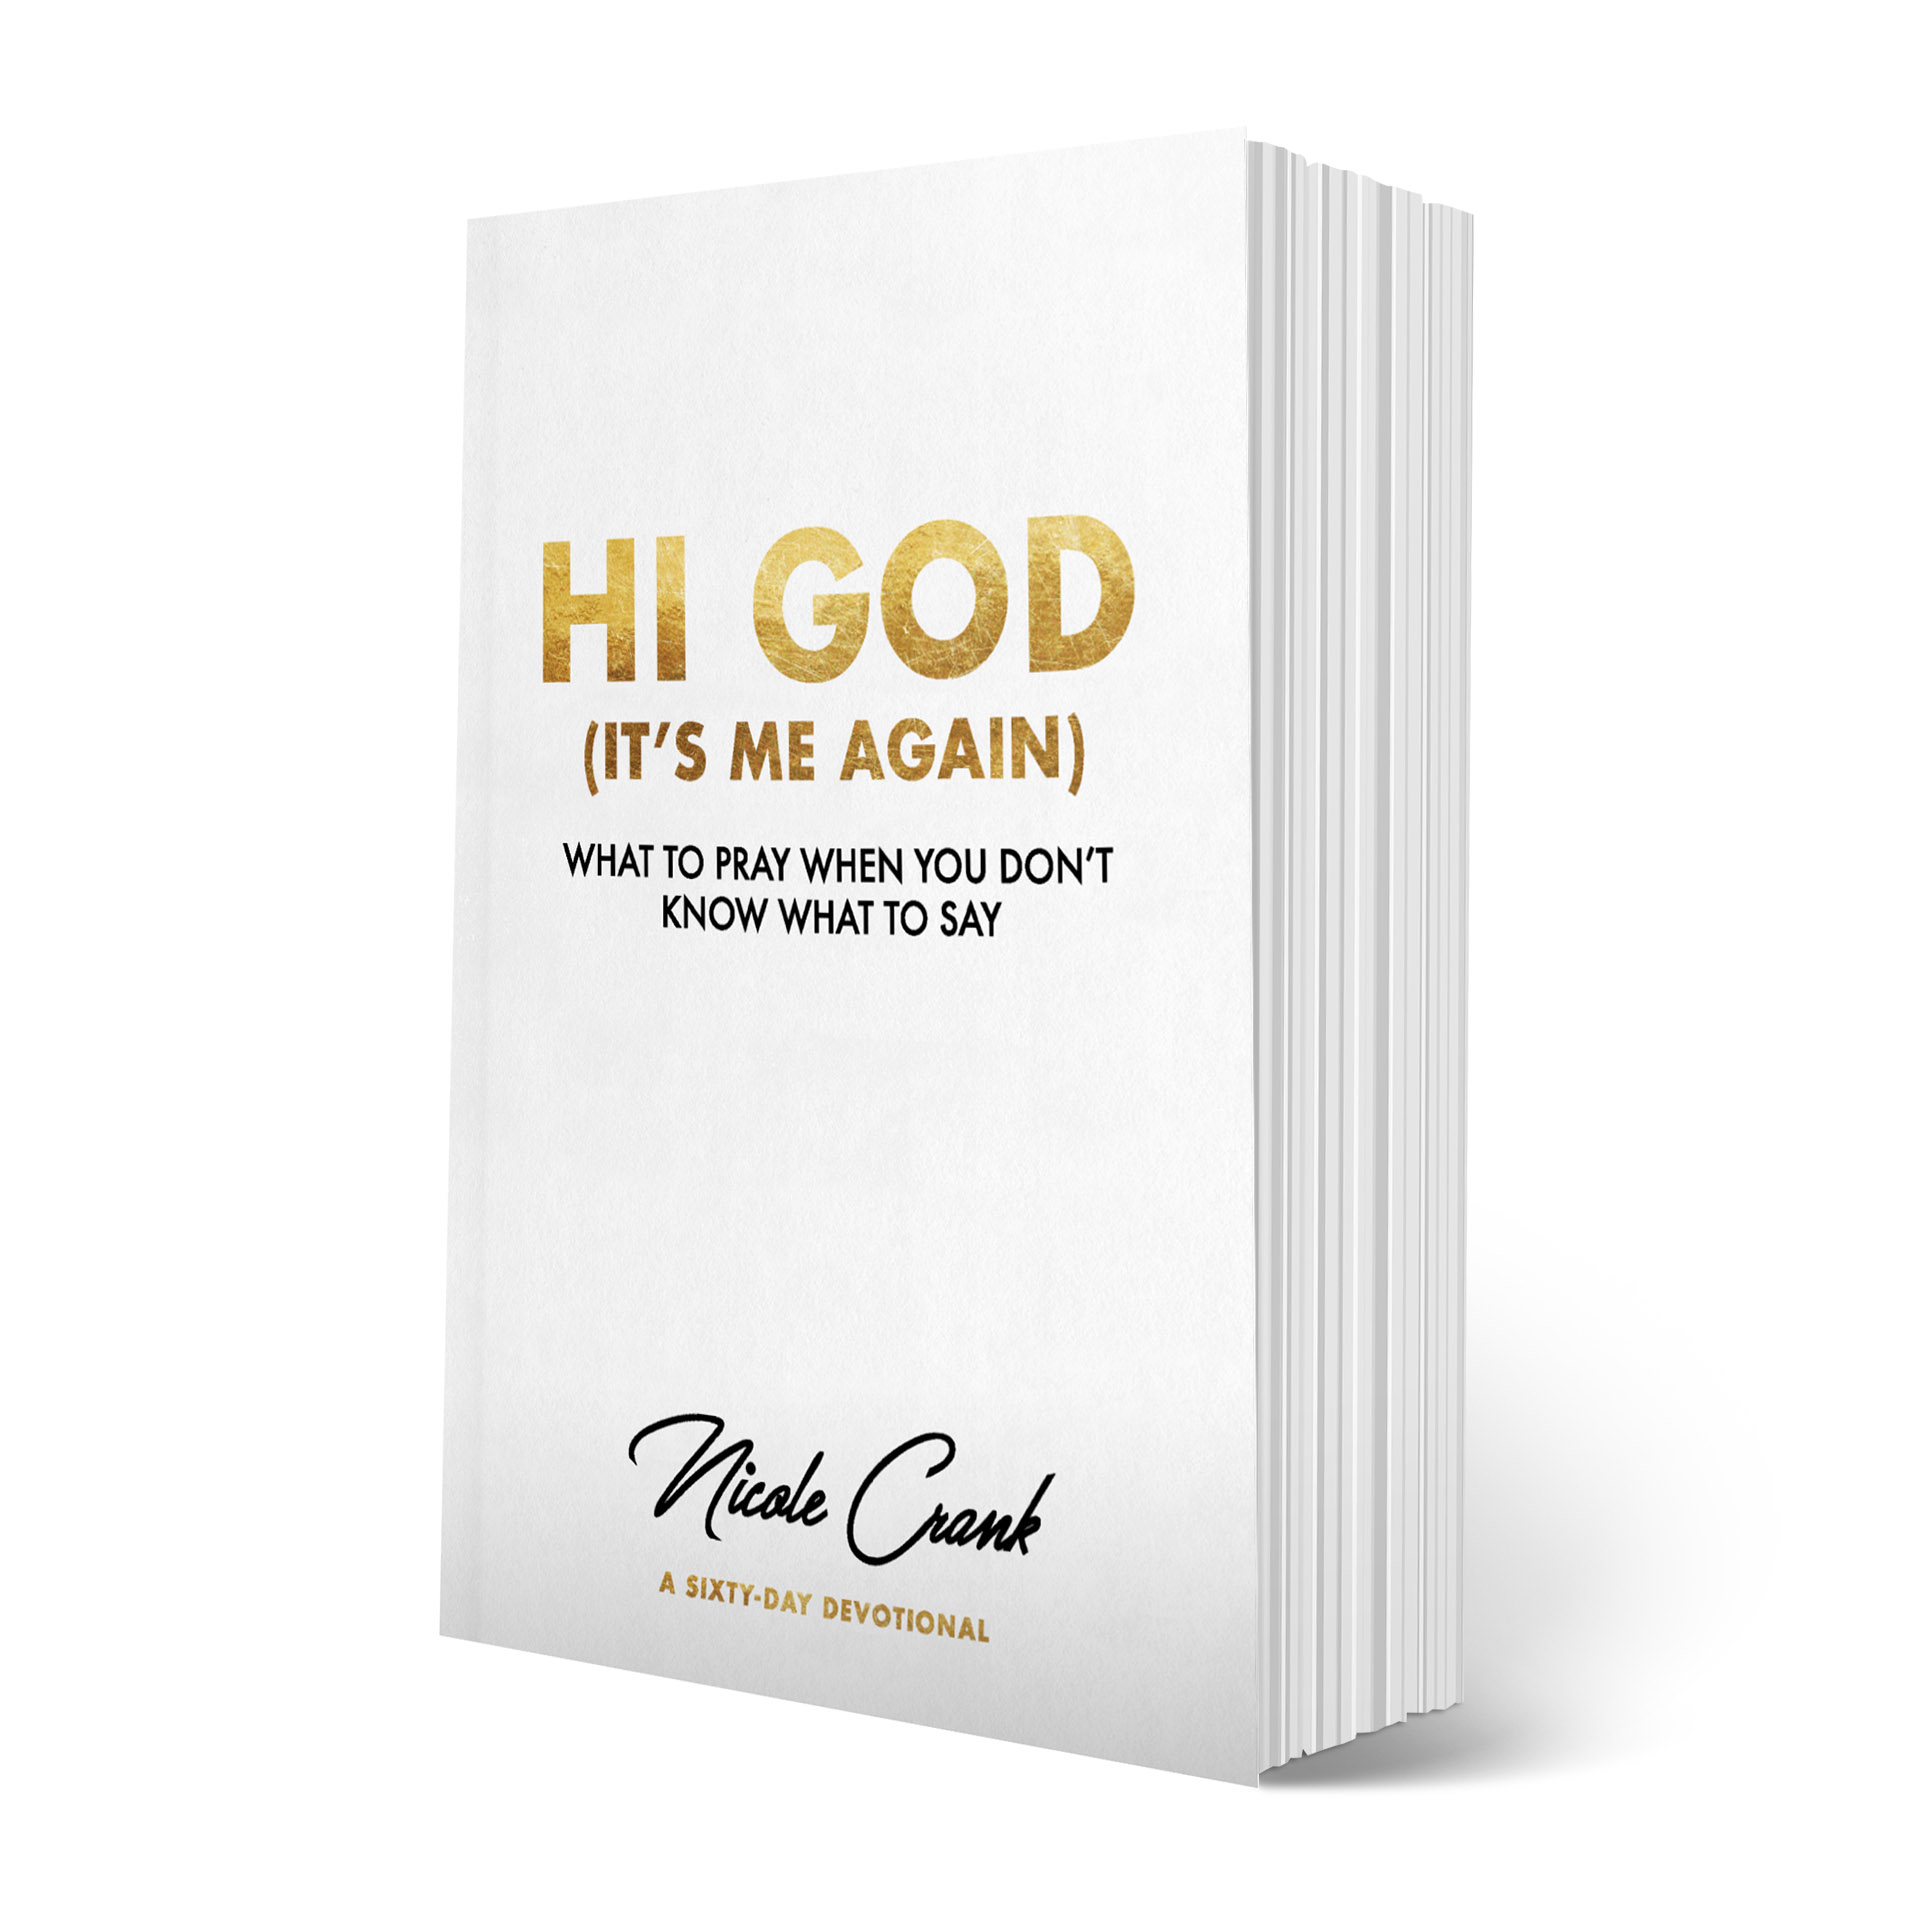 Hi God (It?s Me Again): What To Pray When You Don?t Know What To Say